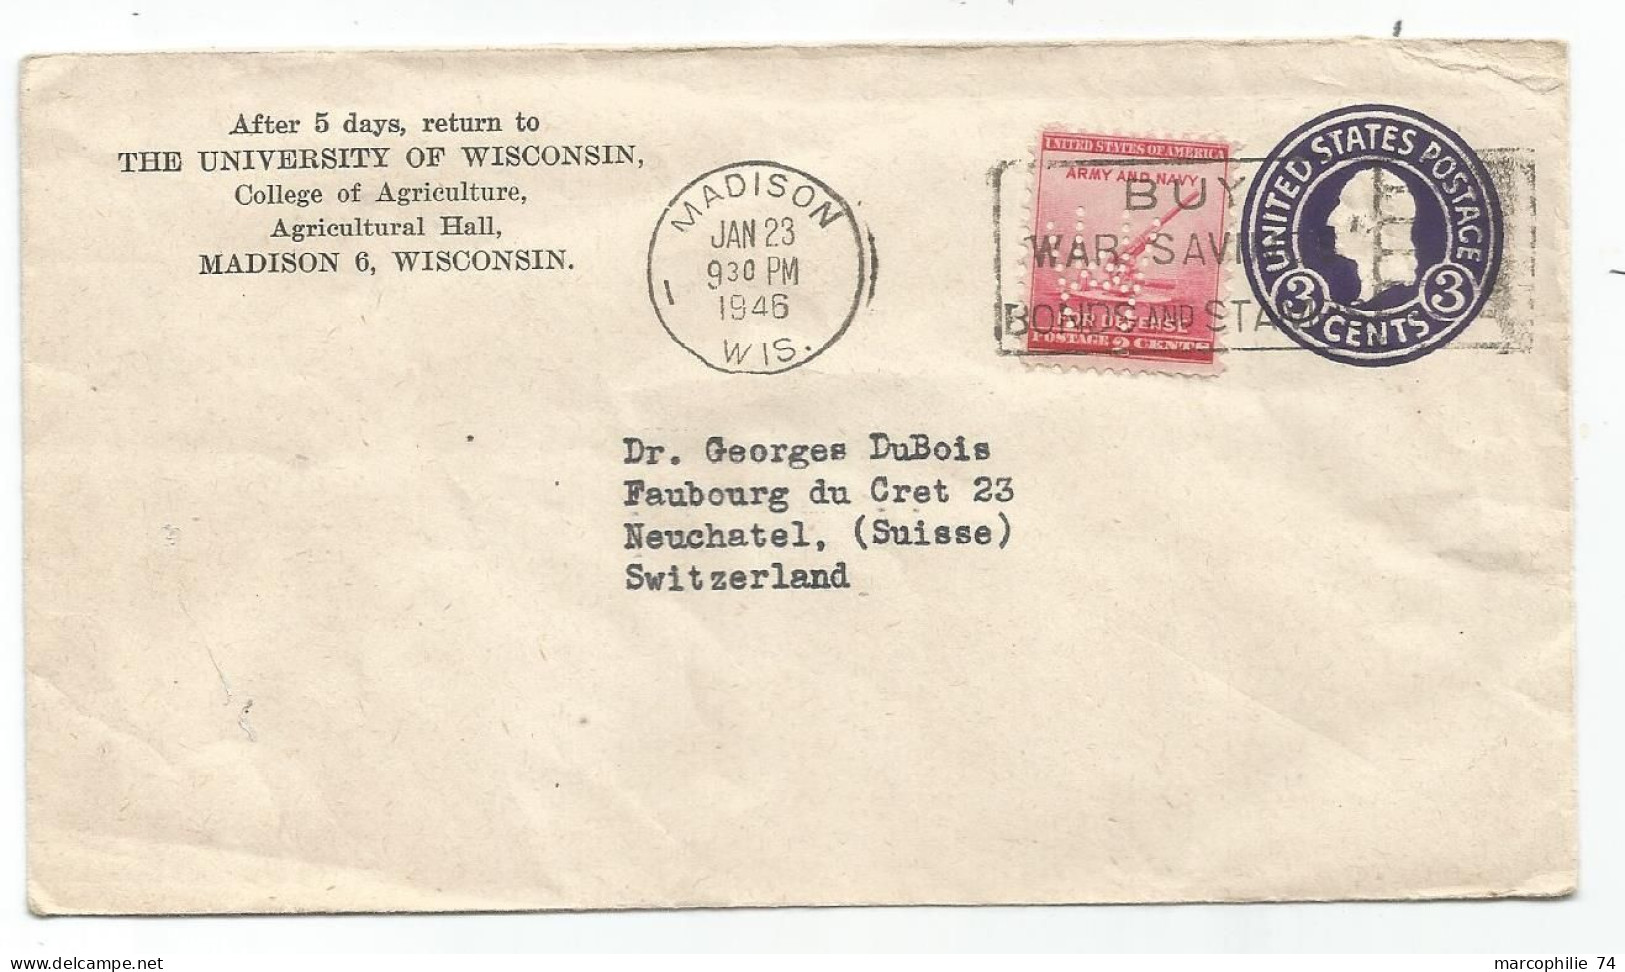 ETATS UNIS ARMY NAVY 2C PERFIN WU SUR ENTIER COVER UNIVERSITY OF WISCONSIN 1946 TO SUISSE - Perfin